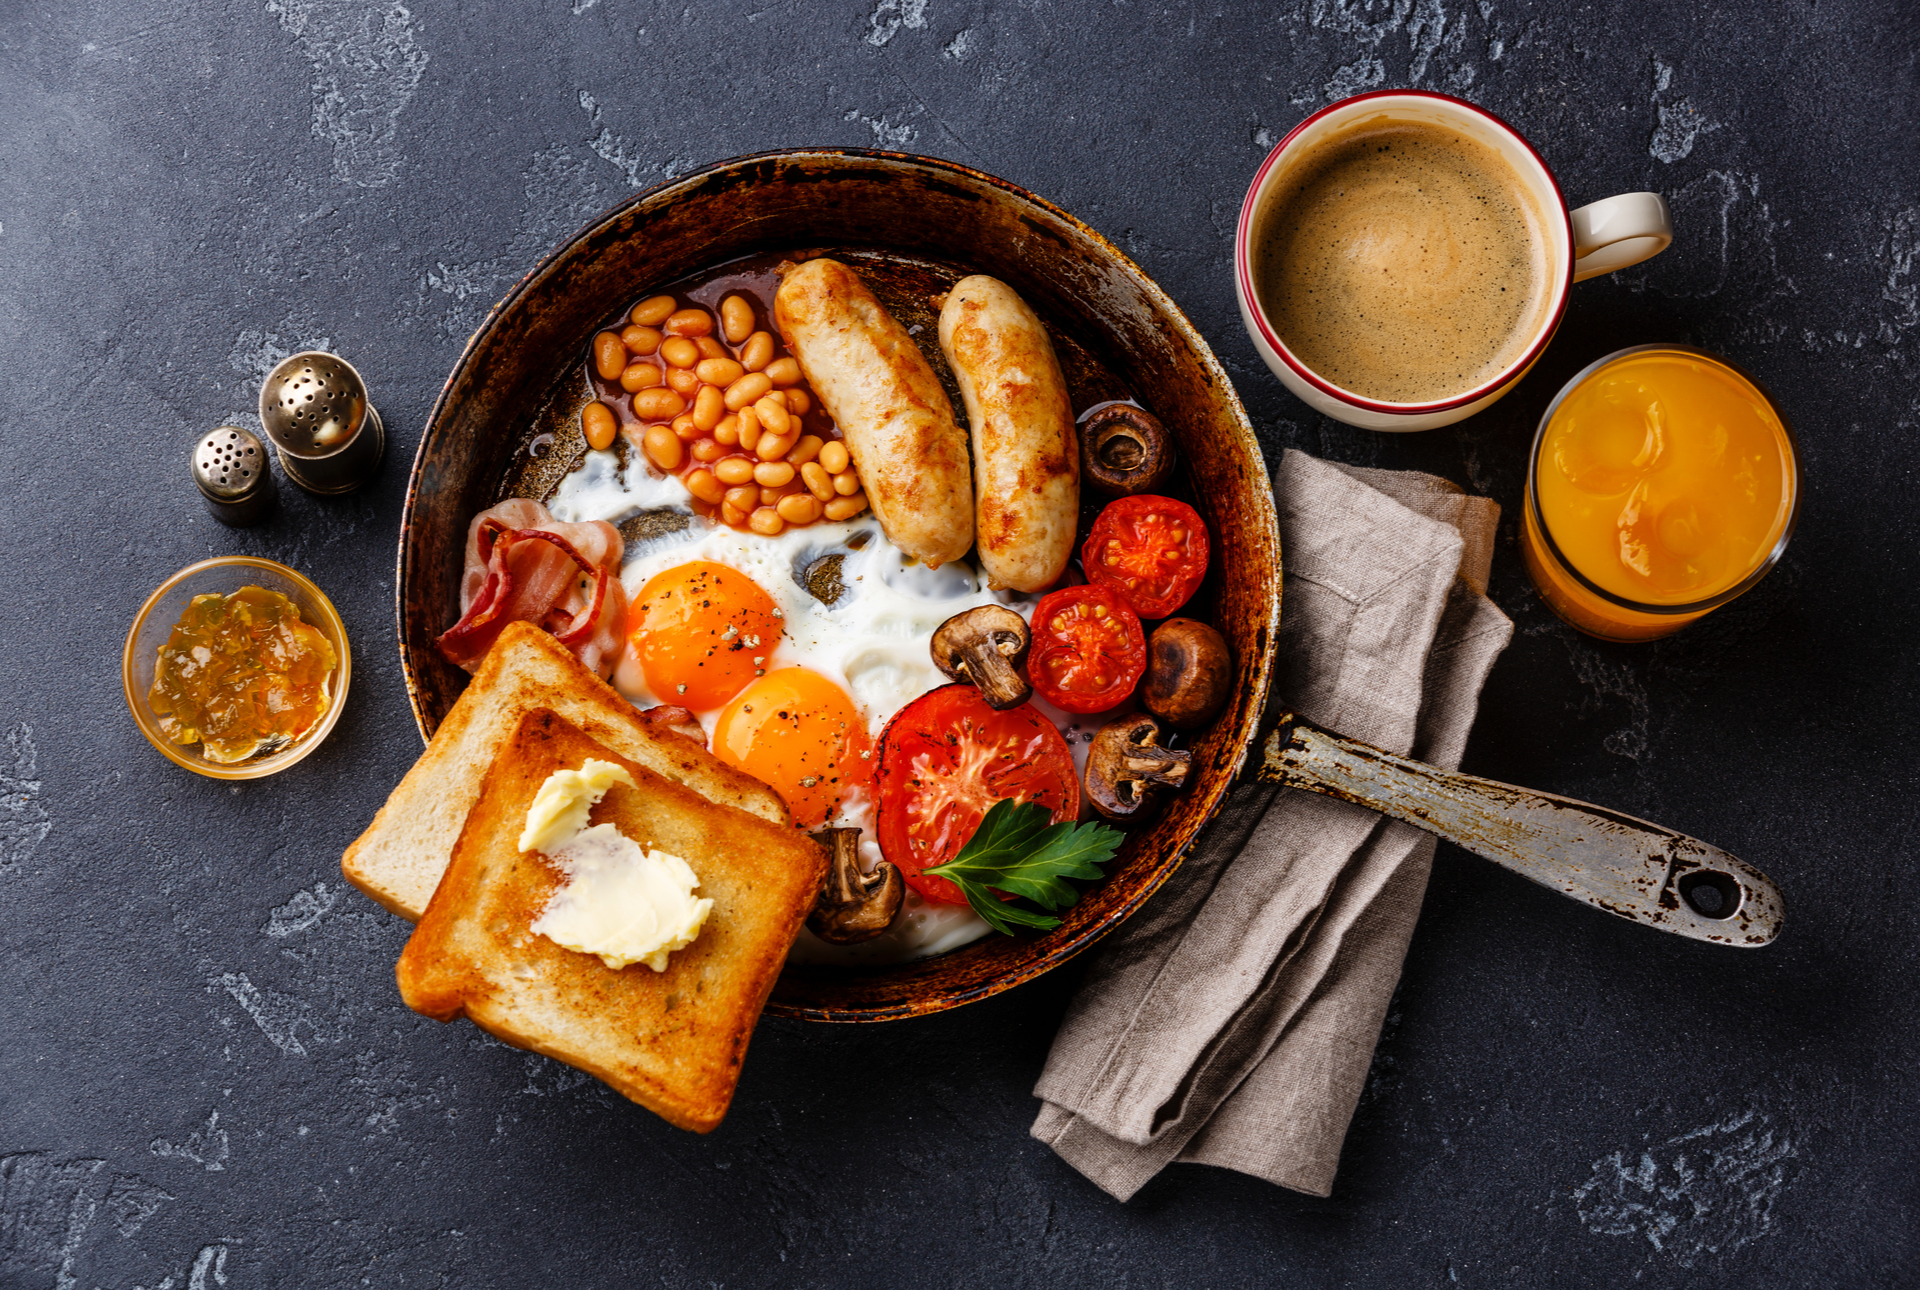 Make a full English breakfast for hot breakfast month using our meats